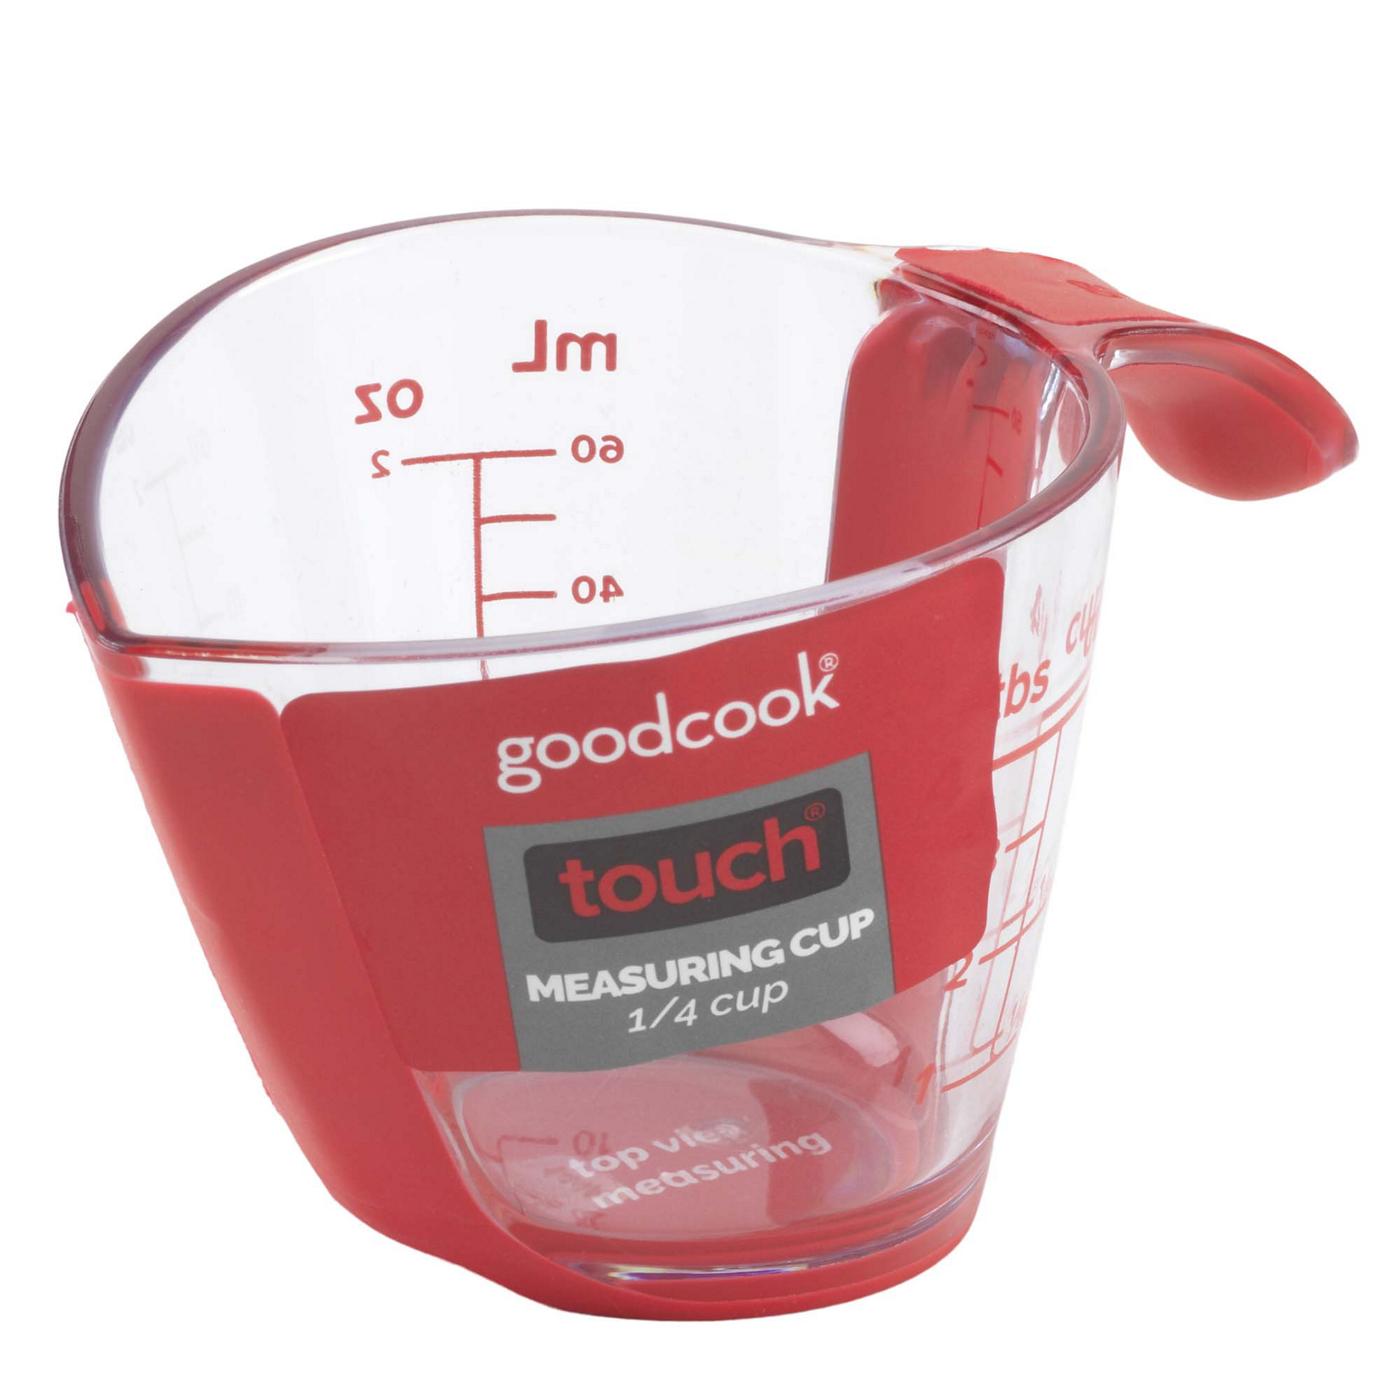 GoodCook Touch Top View Measuring Cup - Assorted; image 1 of 3